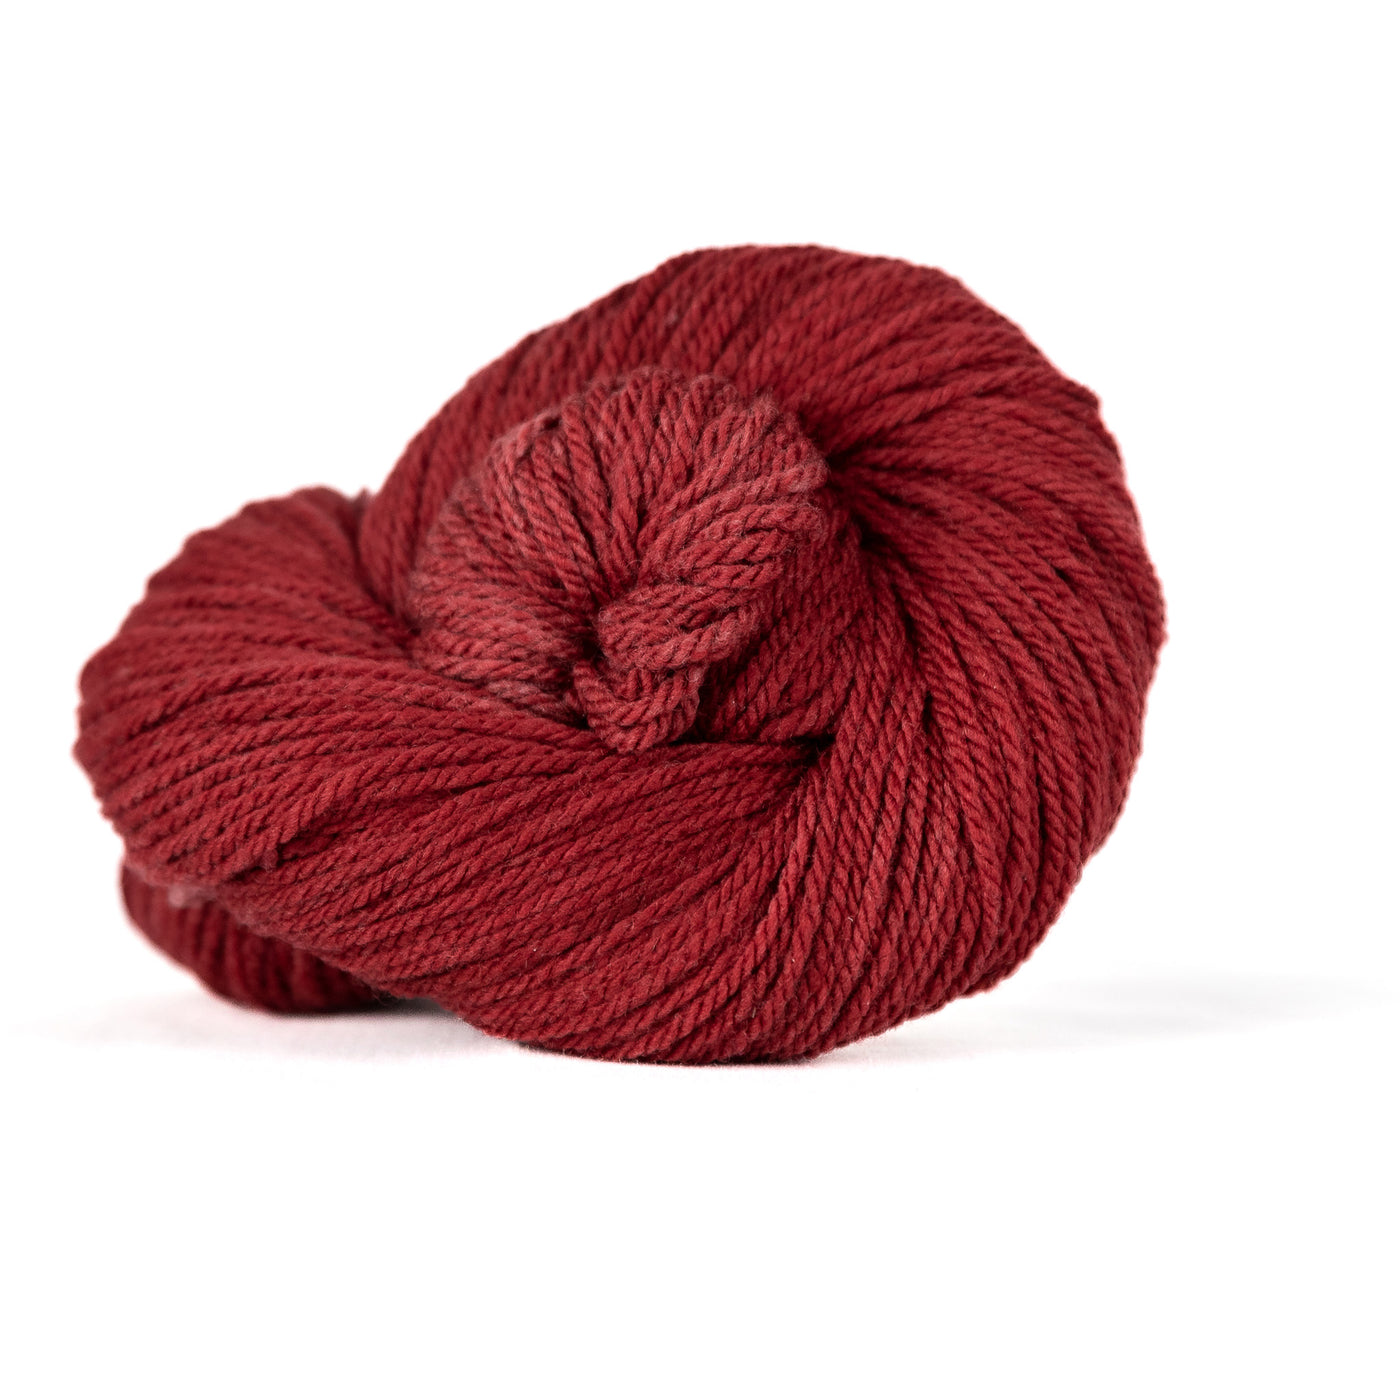 Cora 3ply Worsted Weight Yarn - Russet